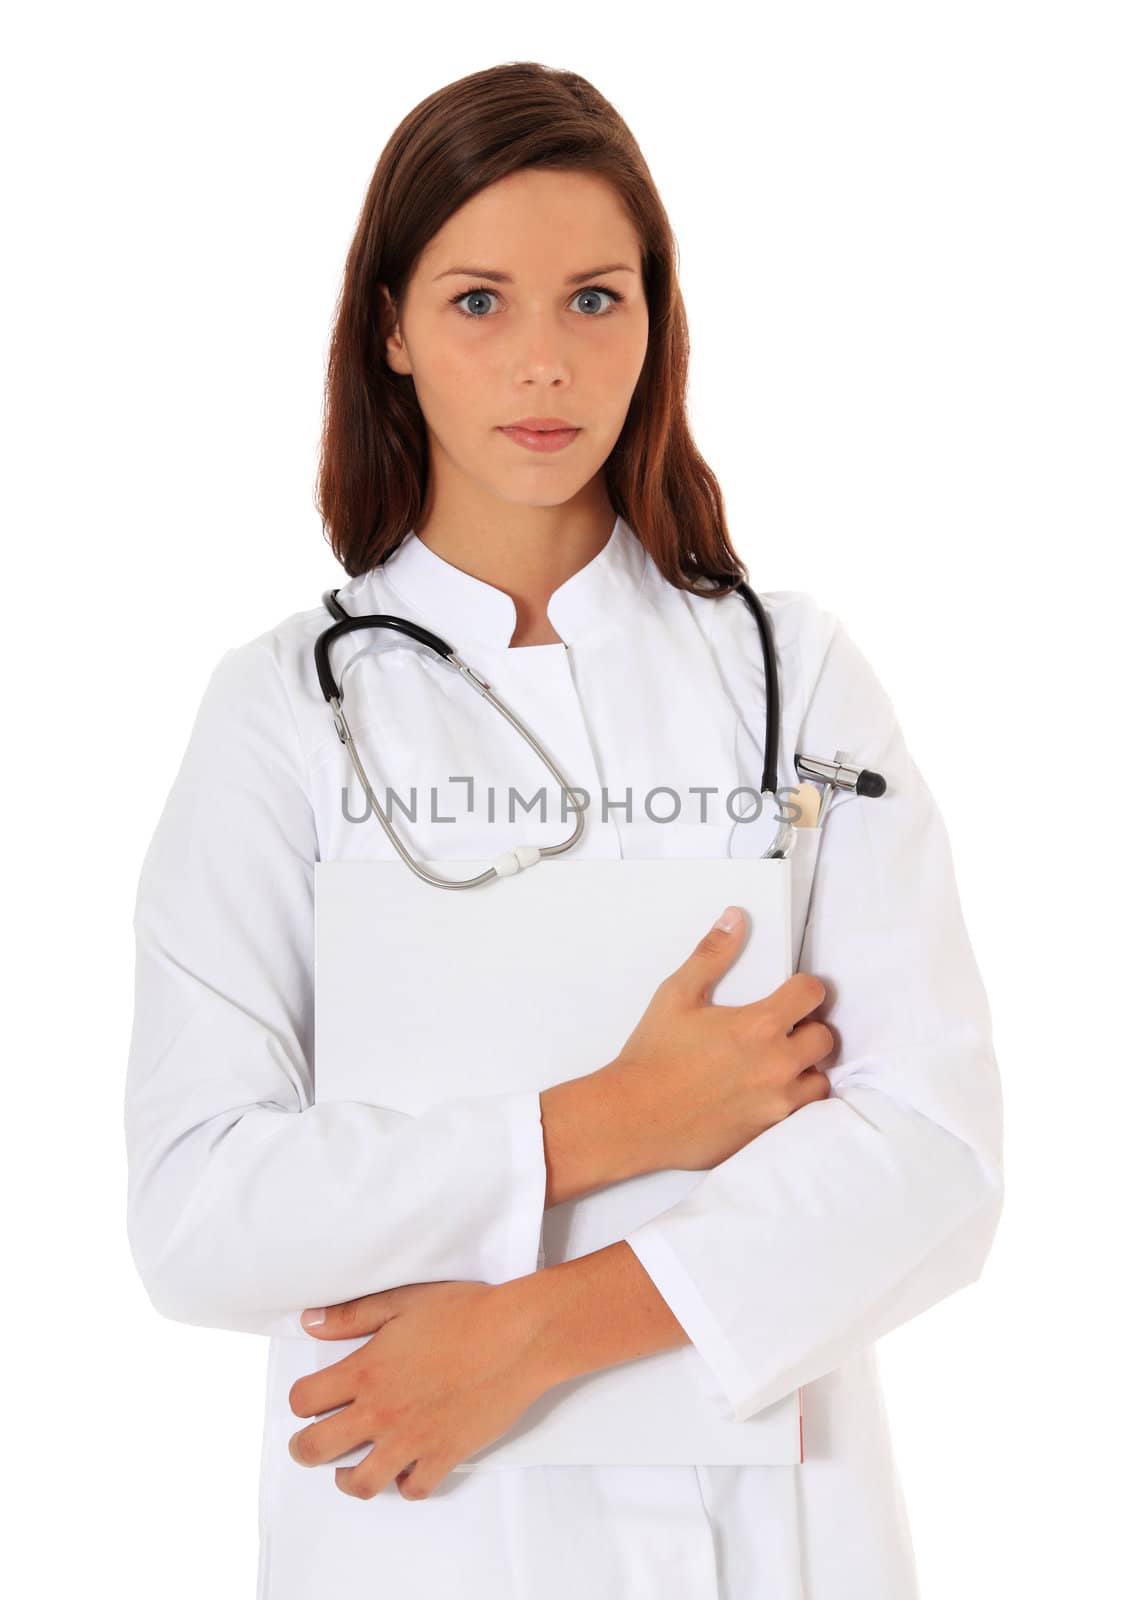 Portrait of an attractive doctor. All on white background.